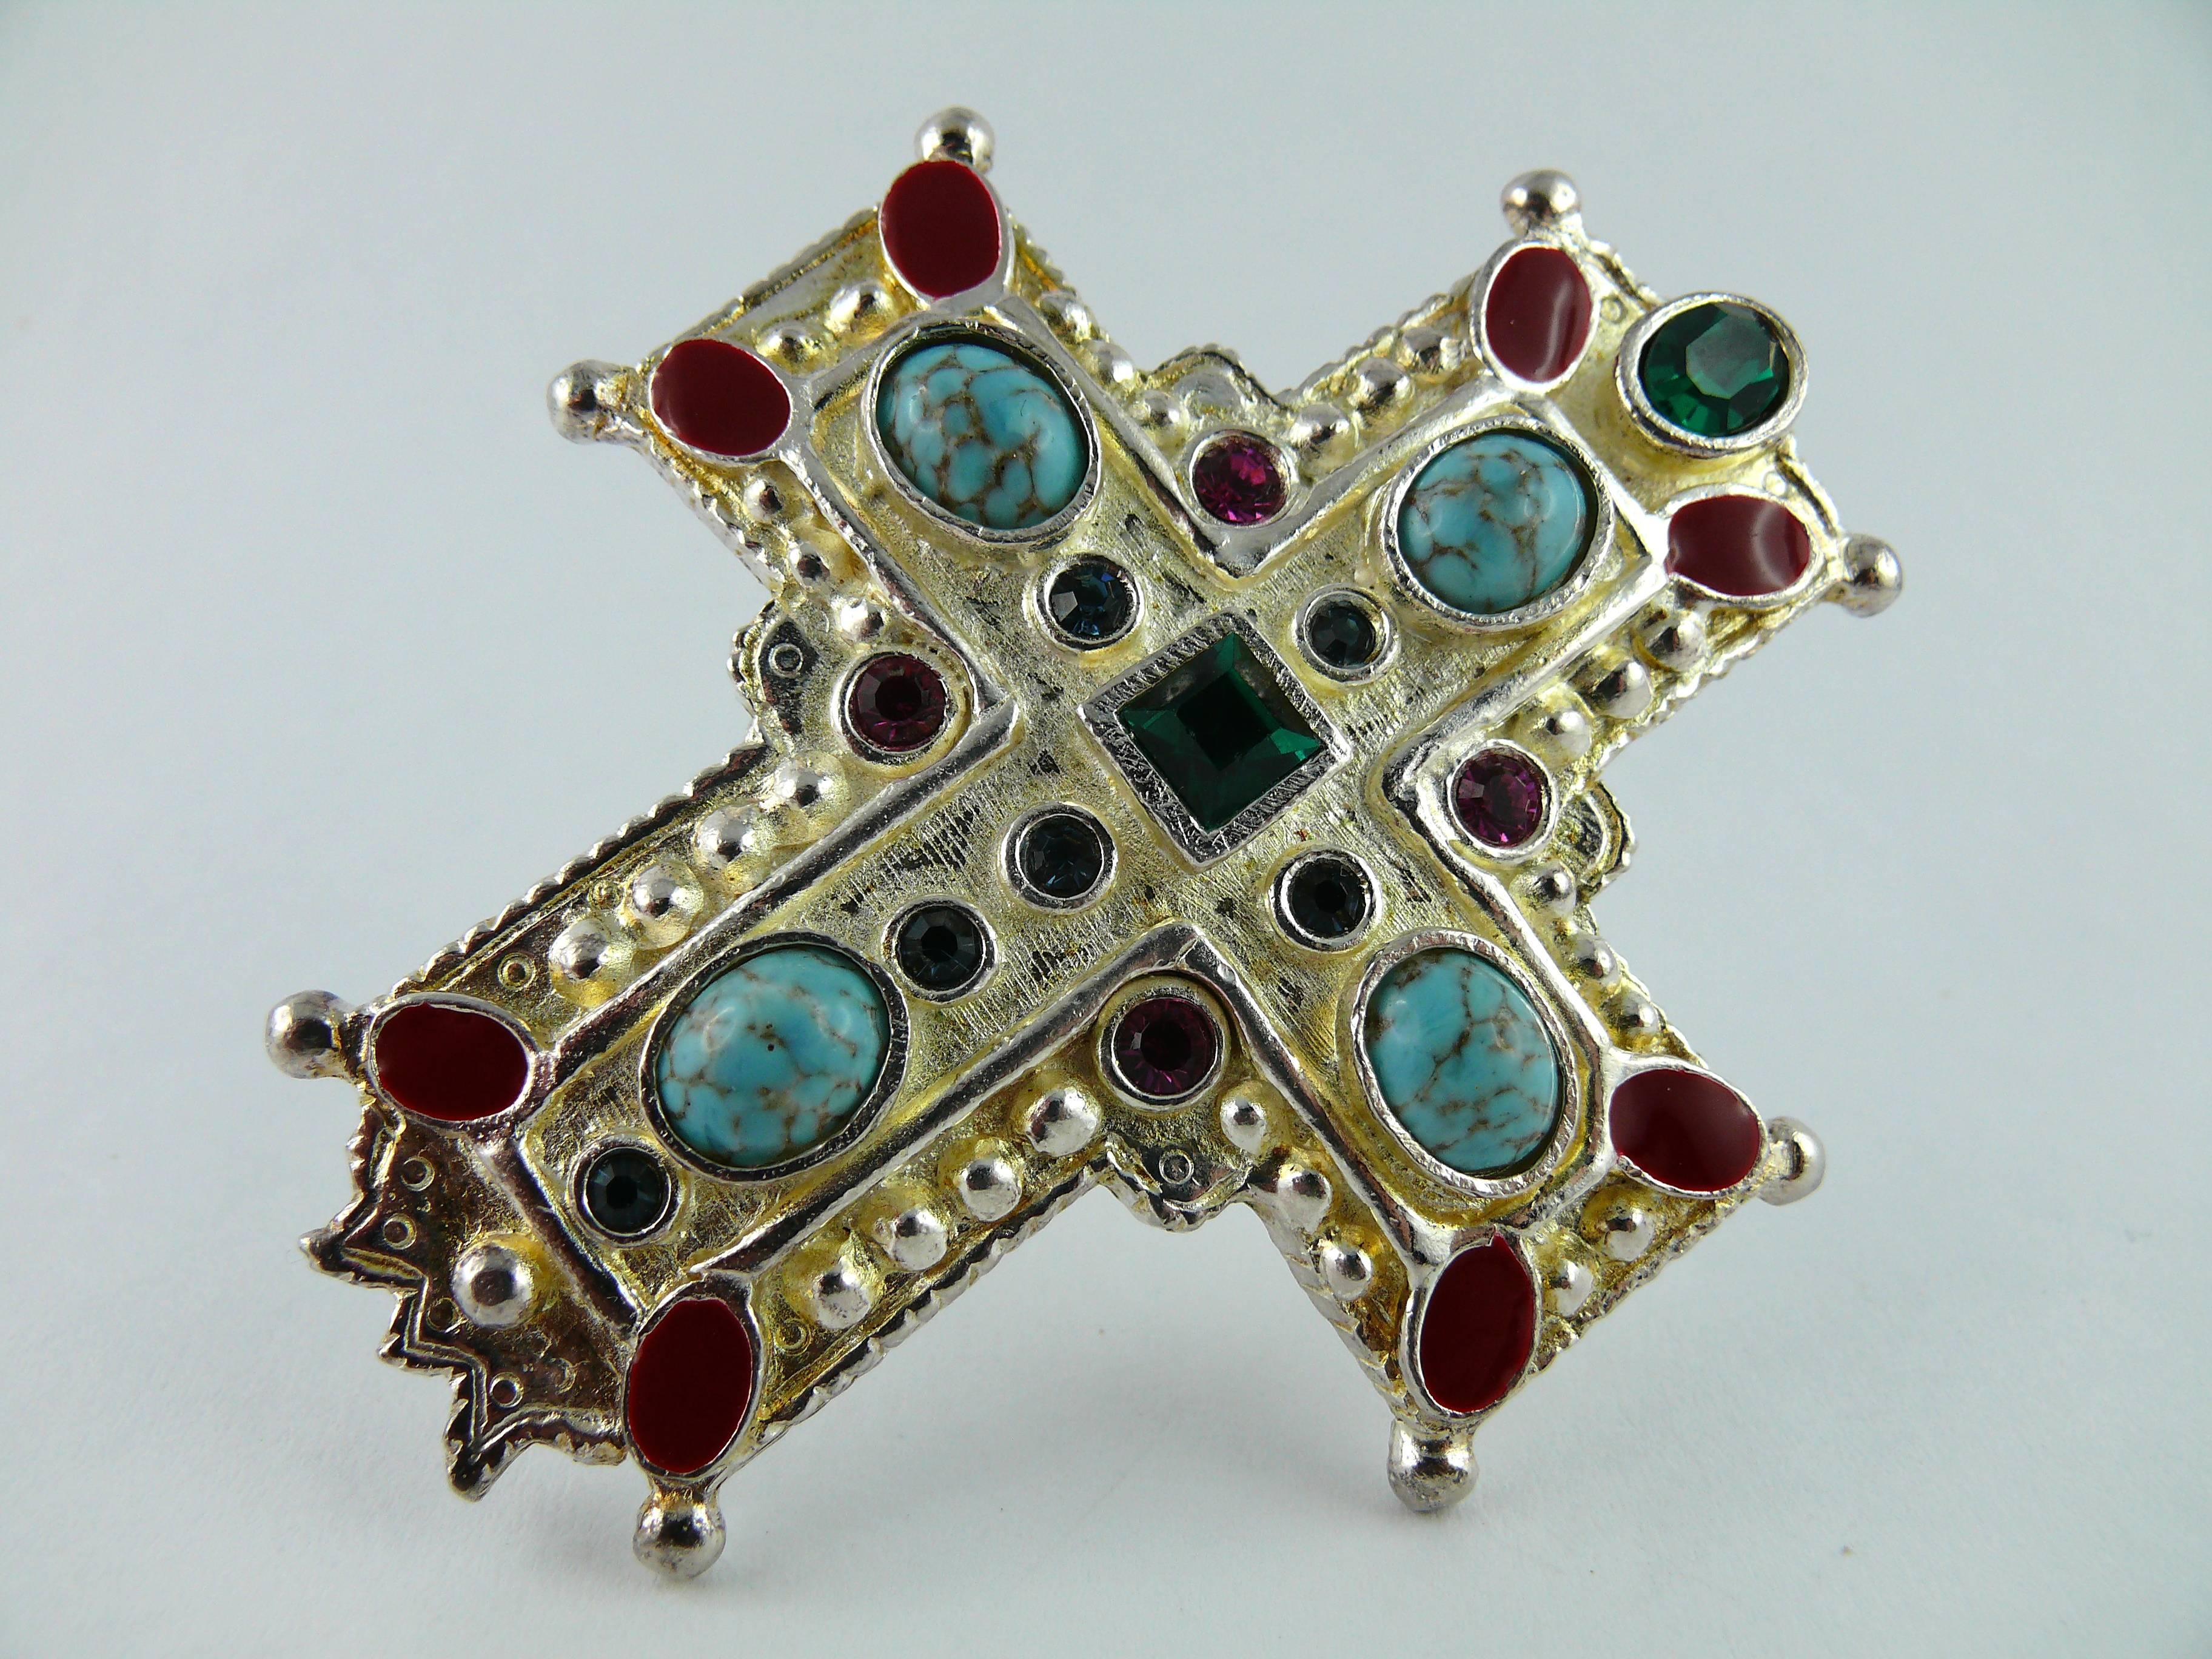 CHRISTIAN LACROIX vintage rare massive jewelled Medieval inspired iconic cross brooch pendant.

Detailed silver tone metal embellished with multicolored crystals, faux turquoise stones and red enamel.

Can be worn as a brooch or a